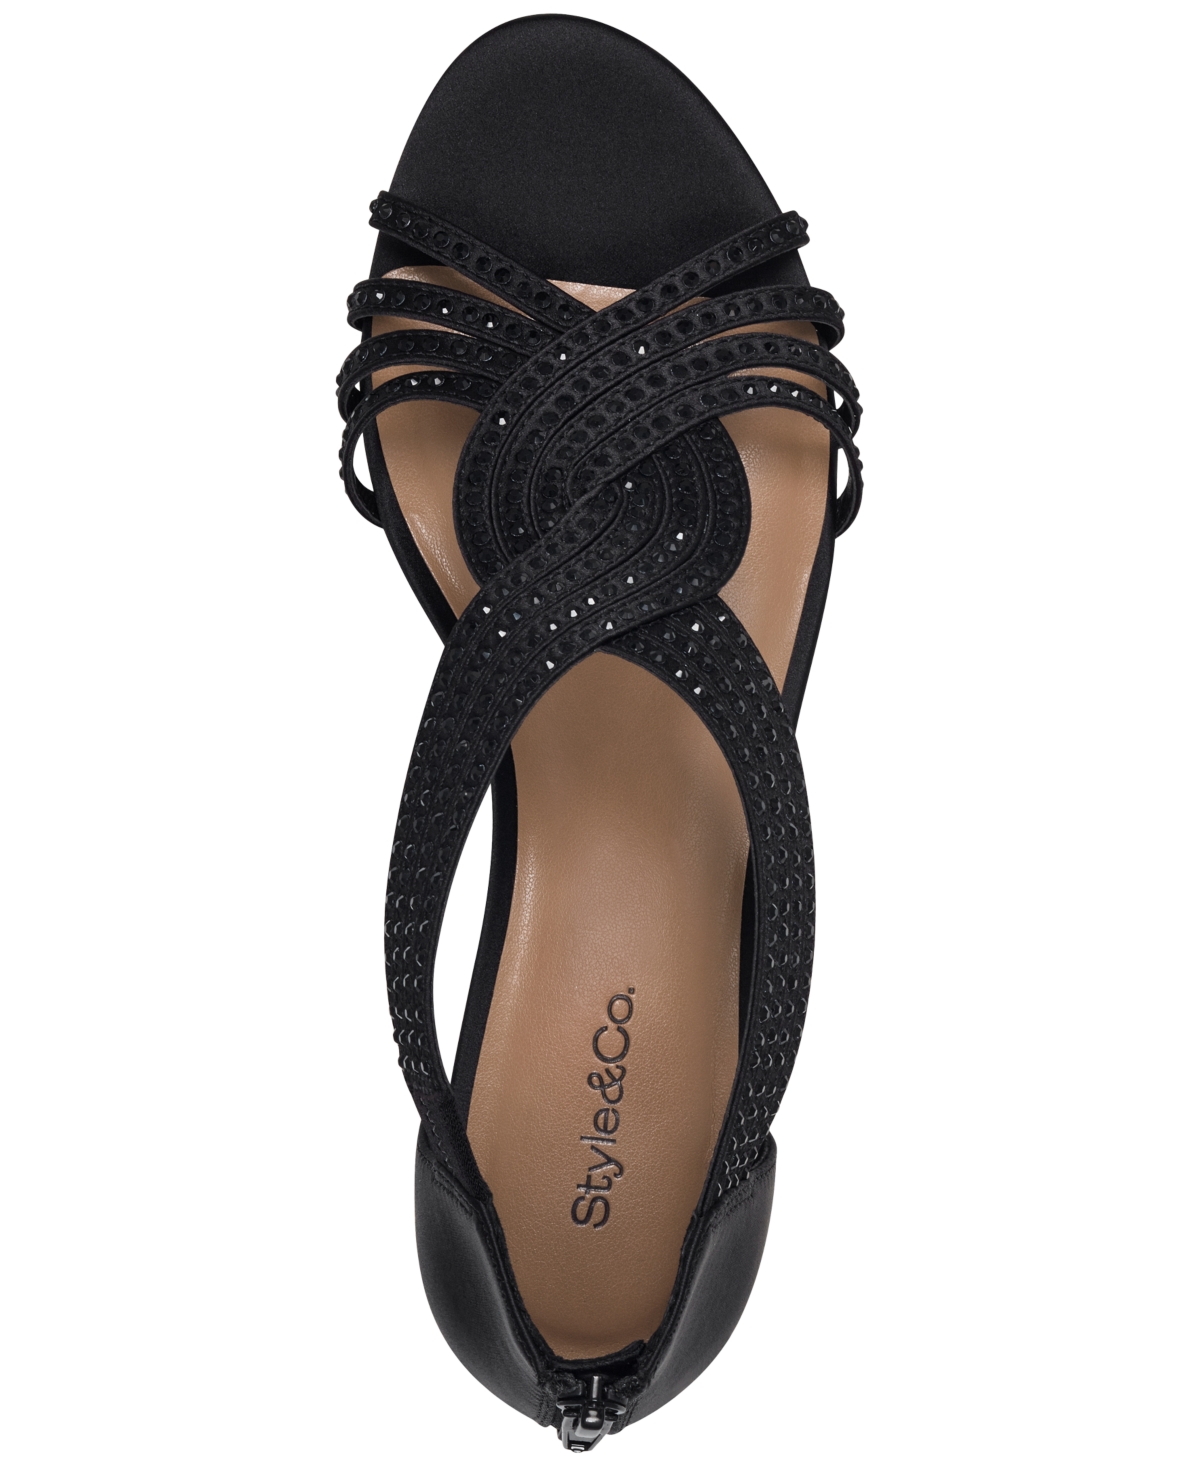 Shop Style & Co Women's Ginifur Embellished Satin Strappy Wedge Sandals, Created For Macy's In Black